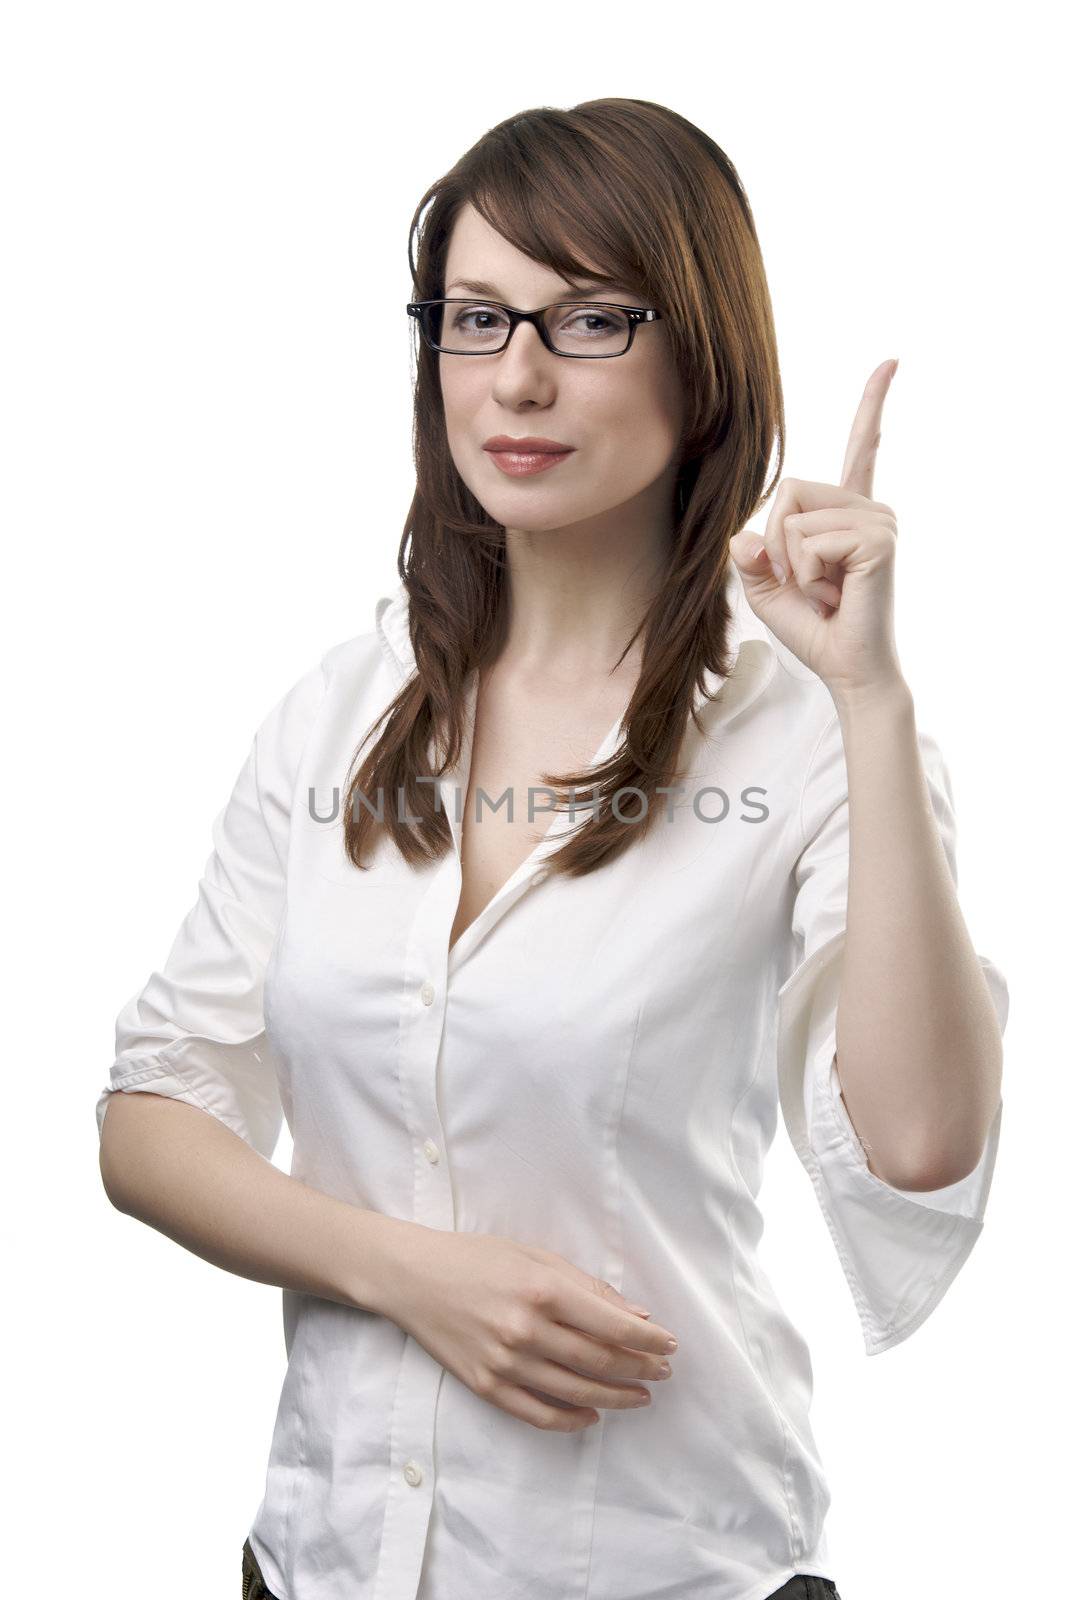 Long haired business woman with eyeglasses